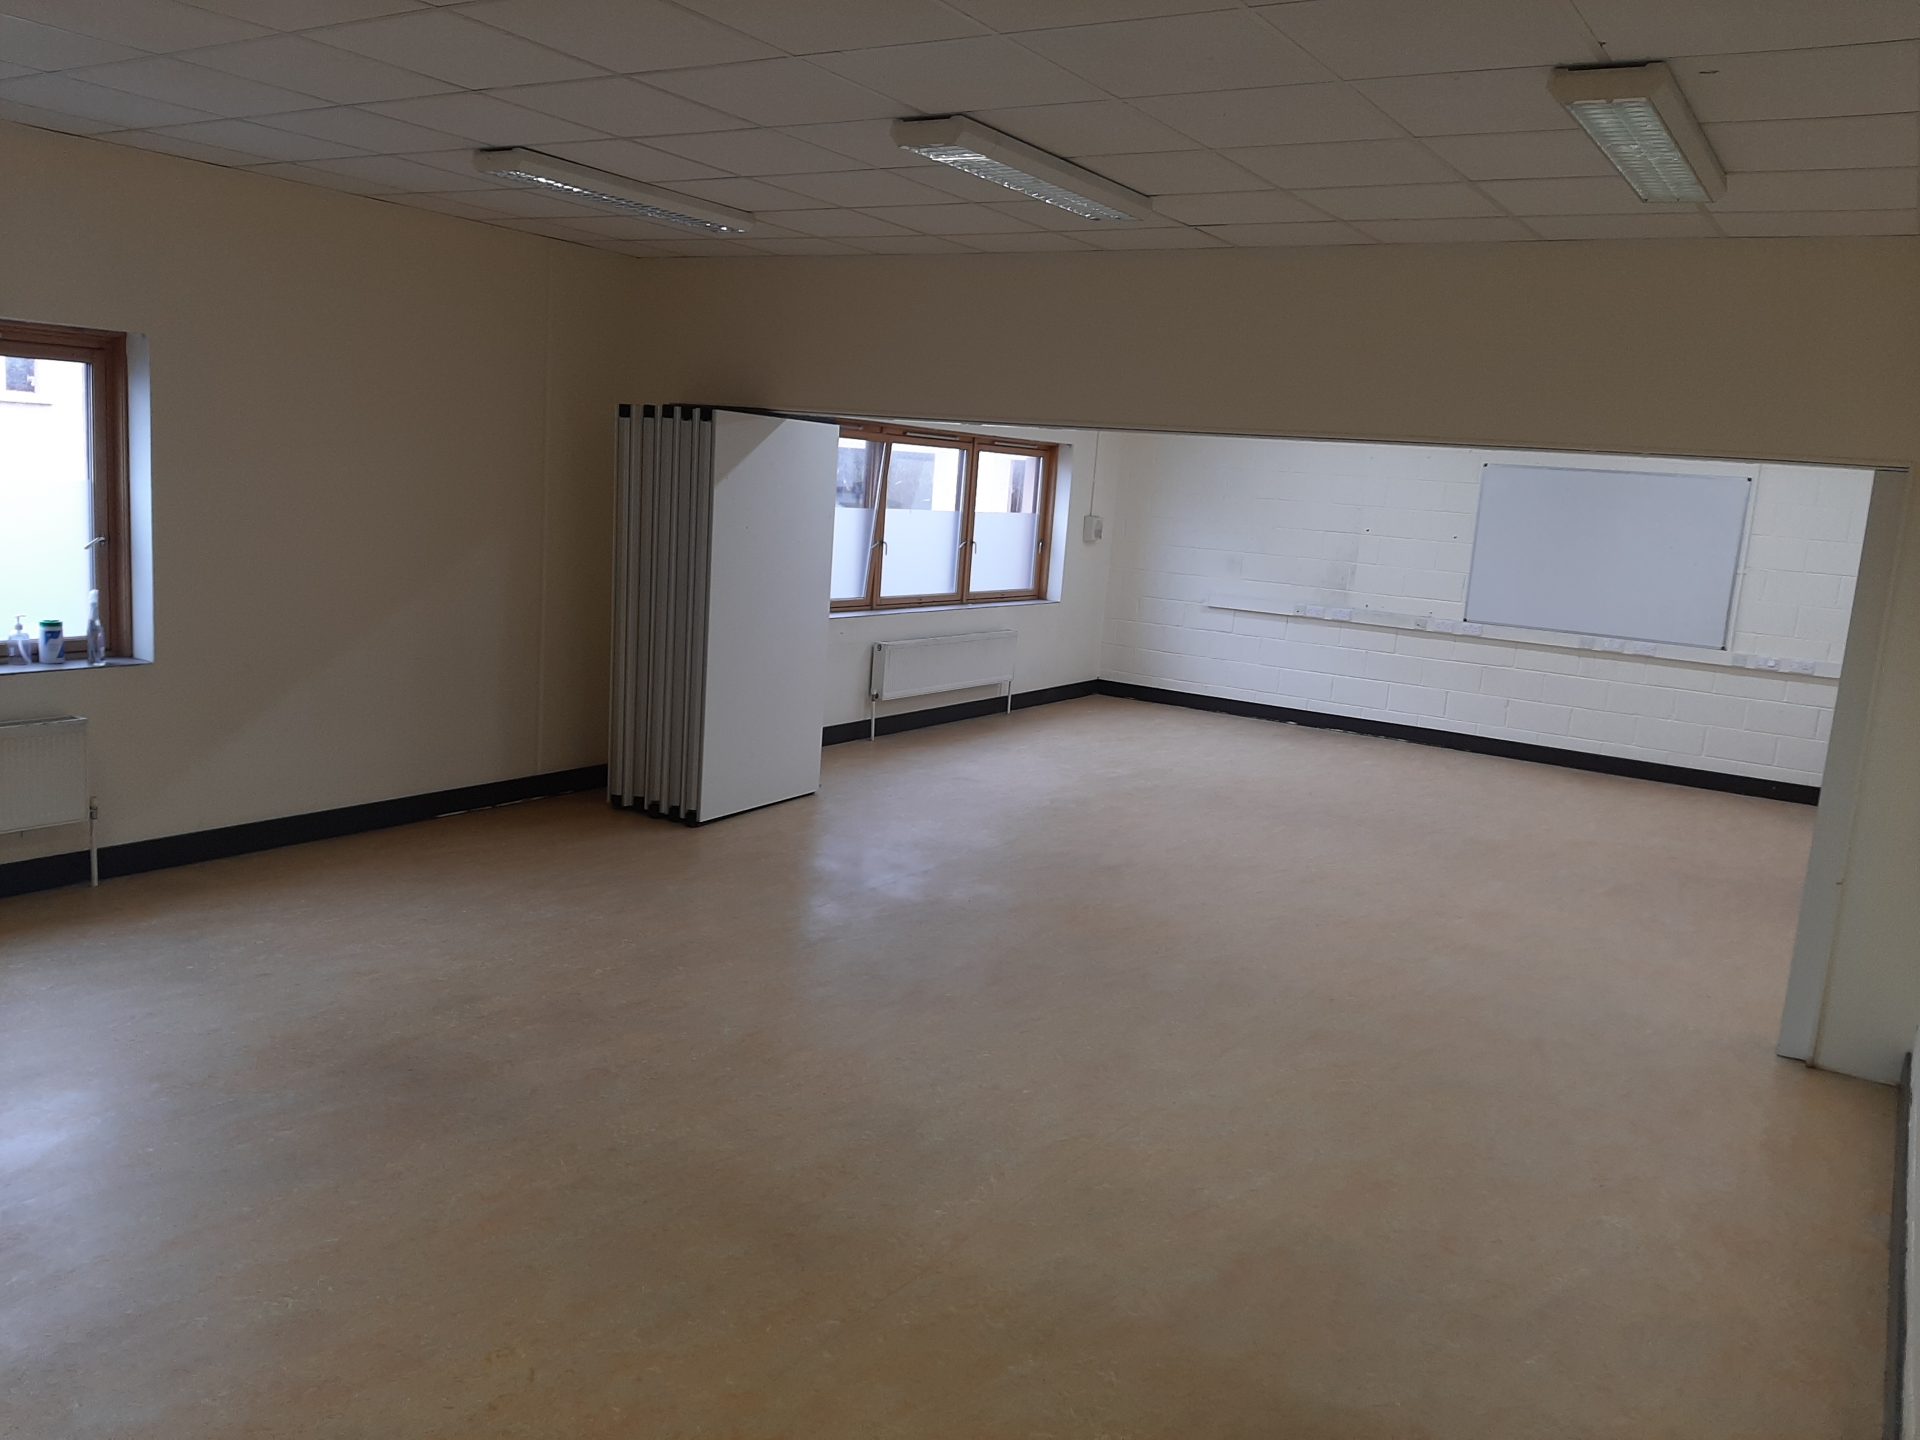 Diswellstown Community Recreation Centre Meeting Rooms with Wall Divider Open